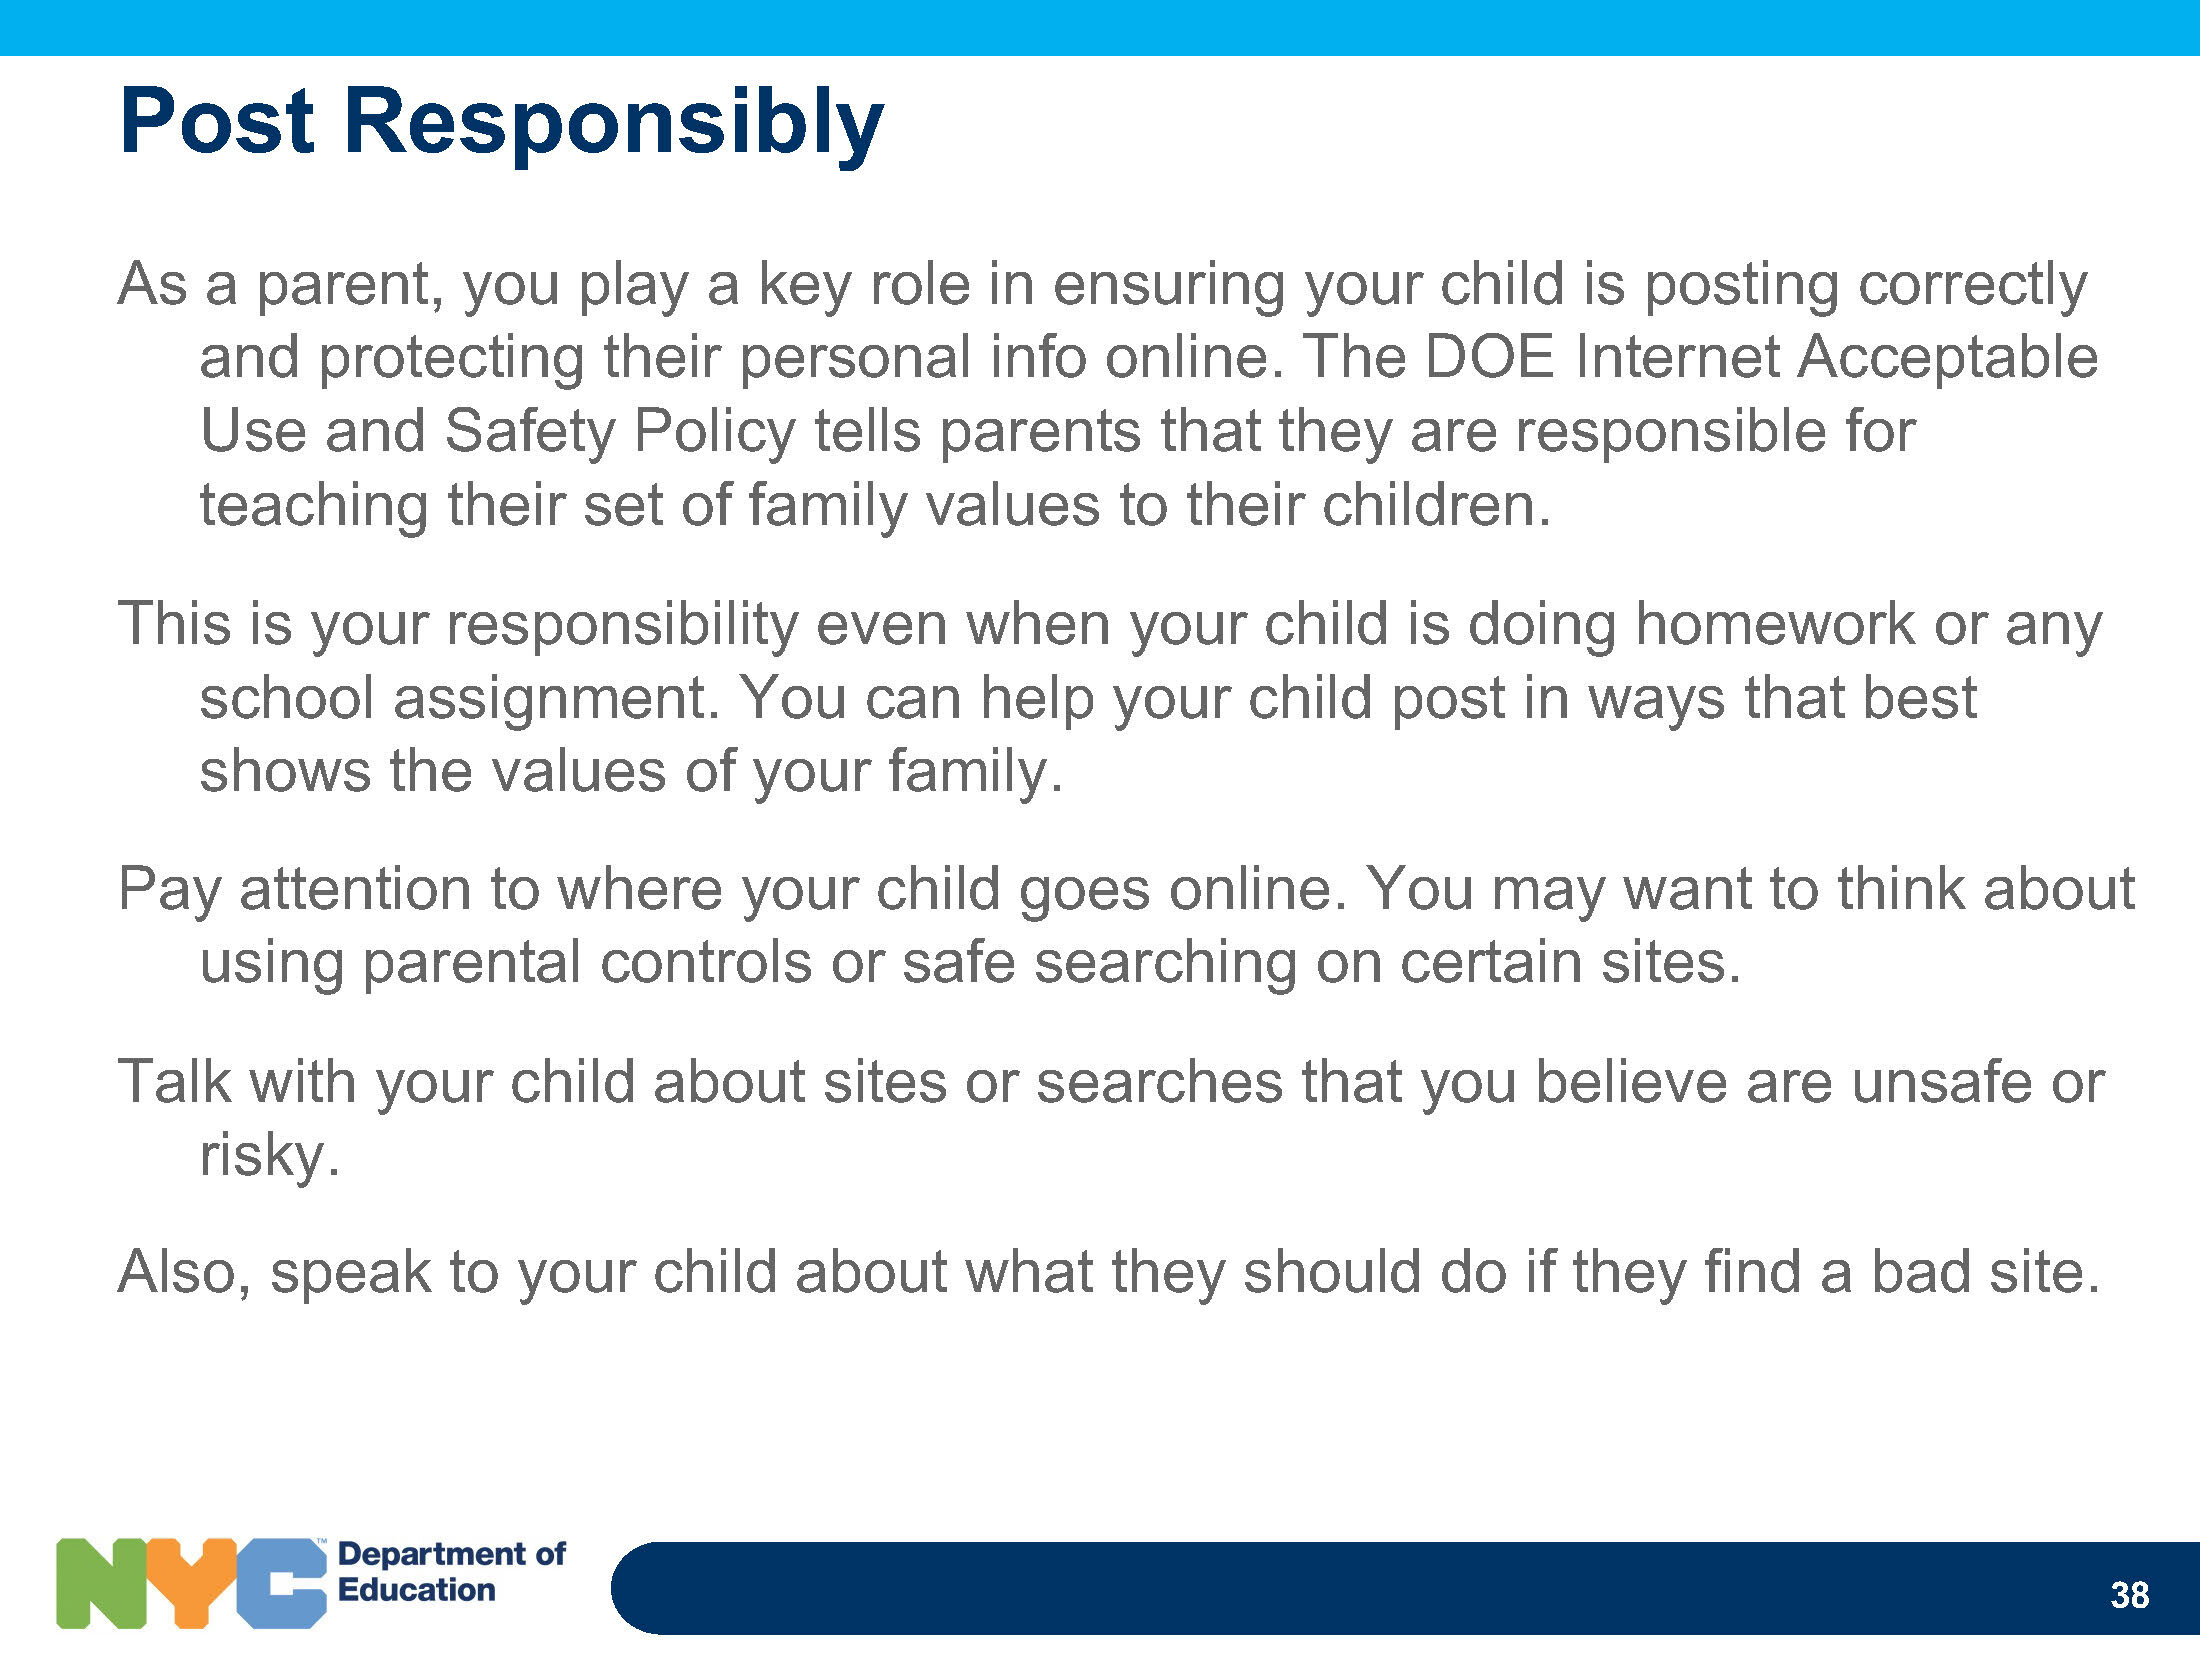 face-bullying-and-cyberbullying-presentation-for-parents_Page_38.jpg